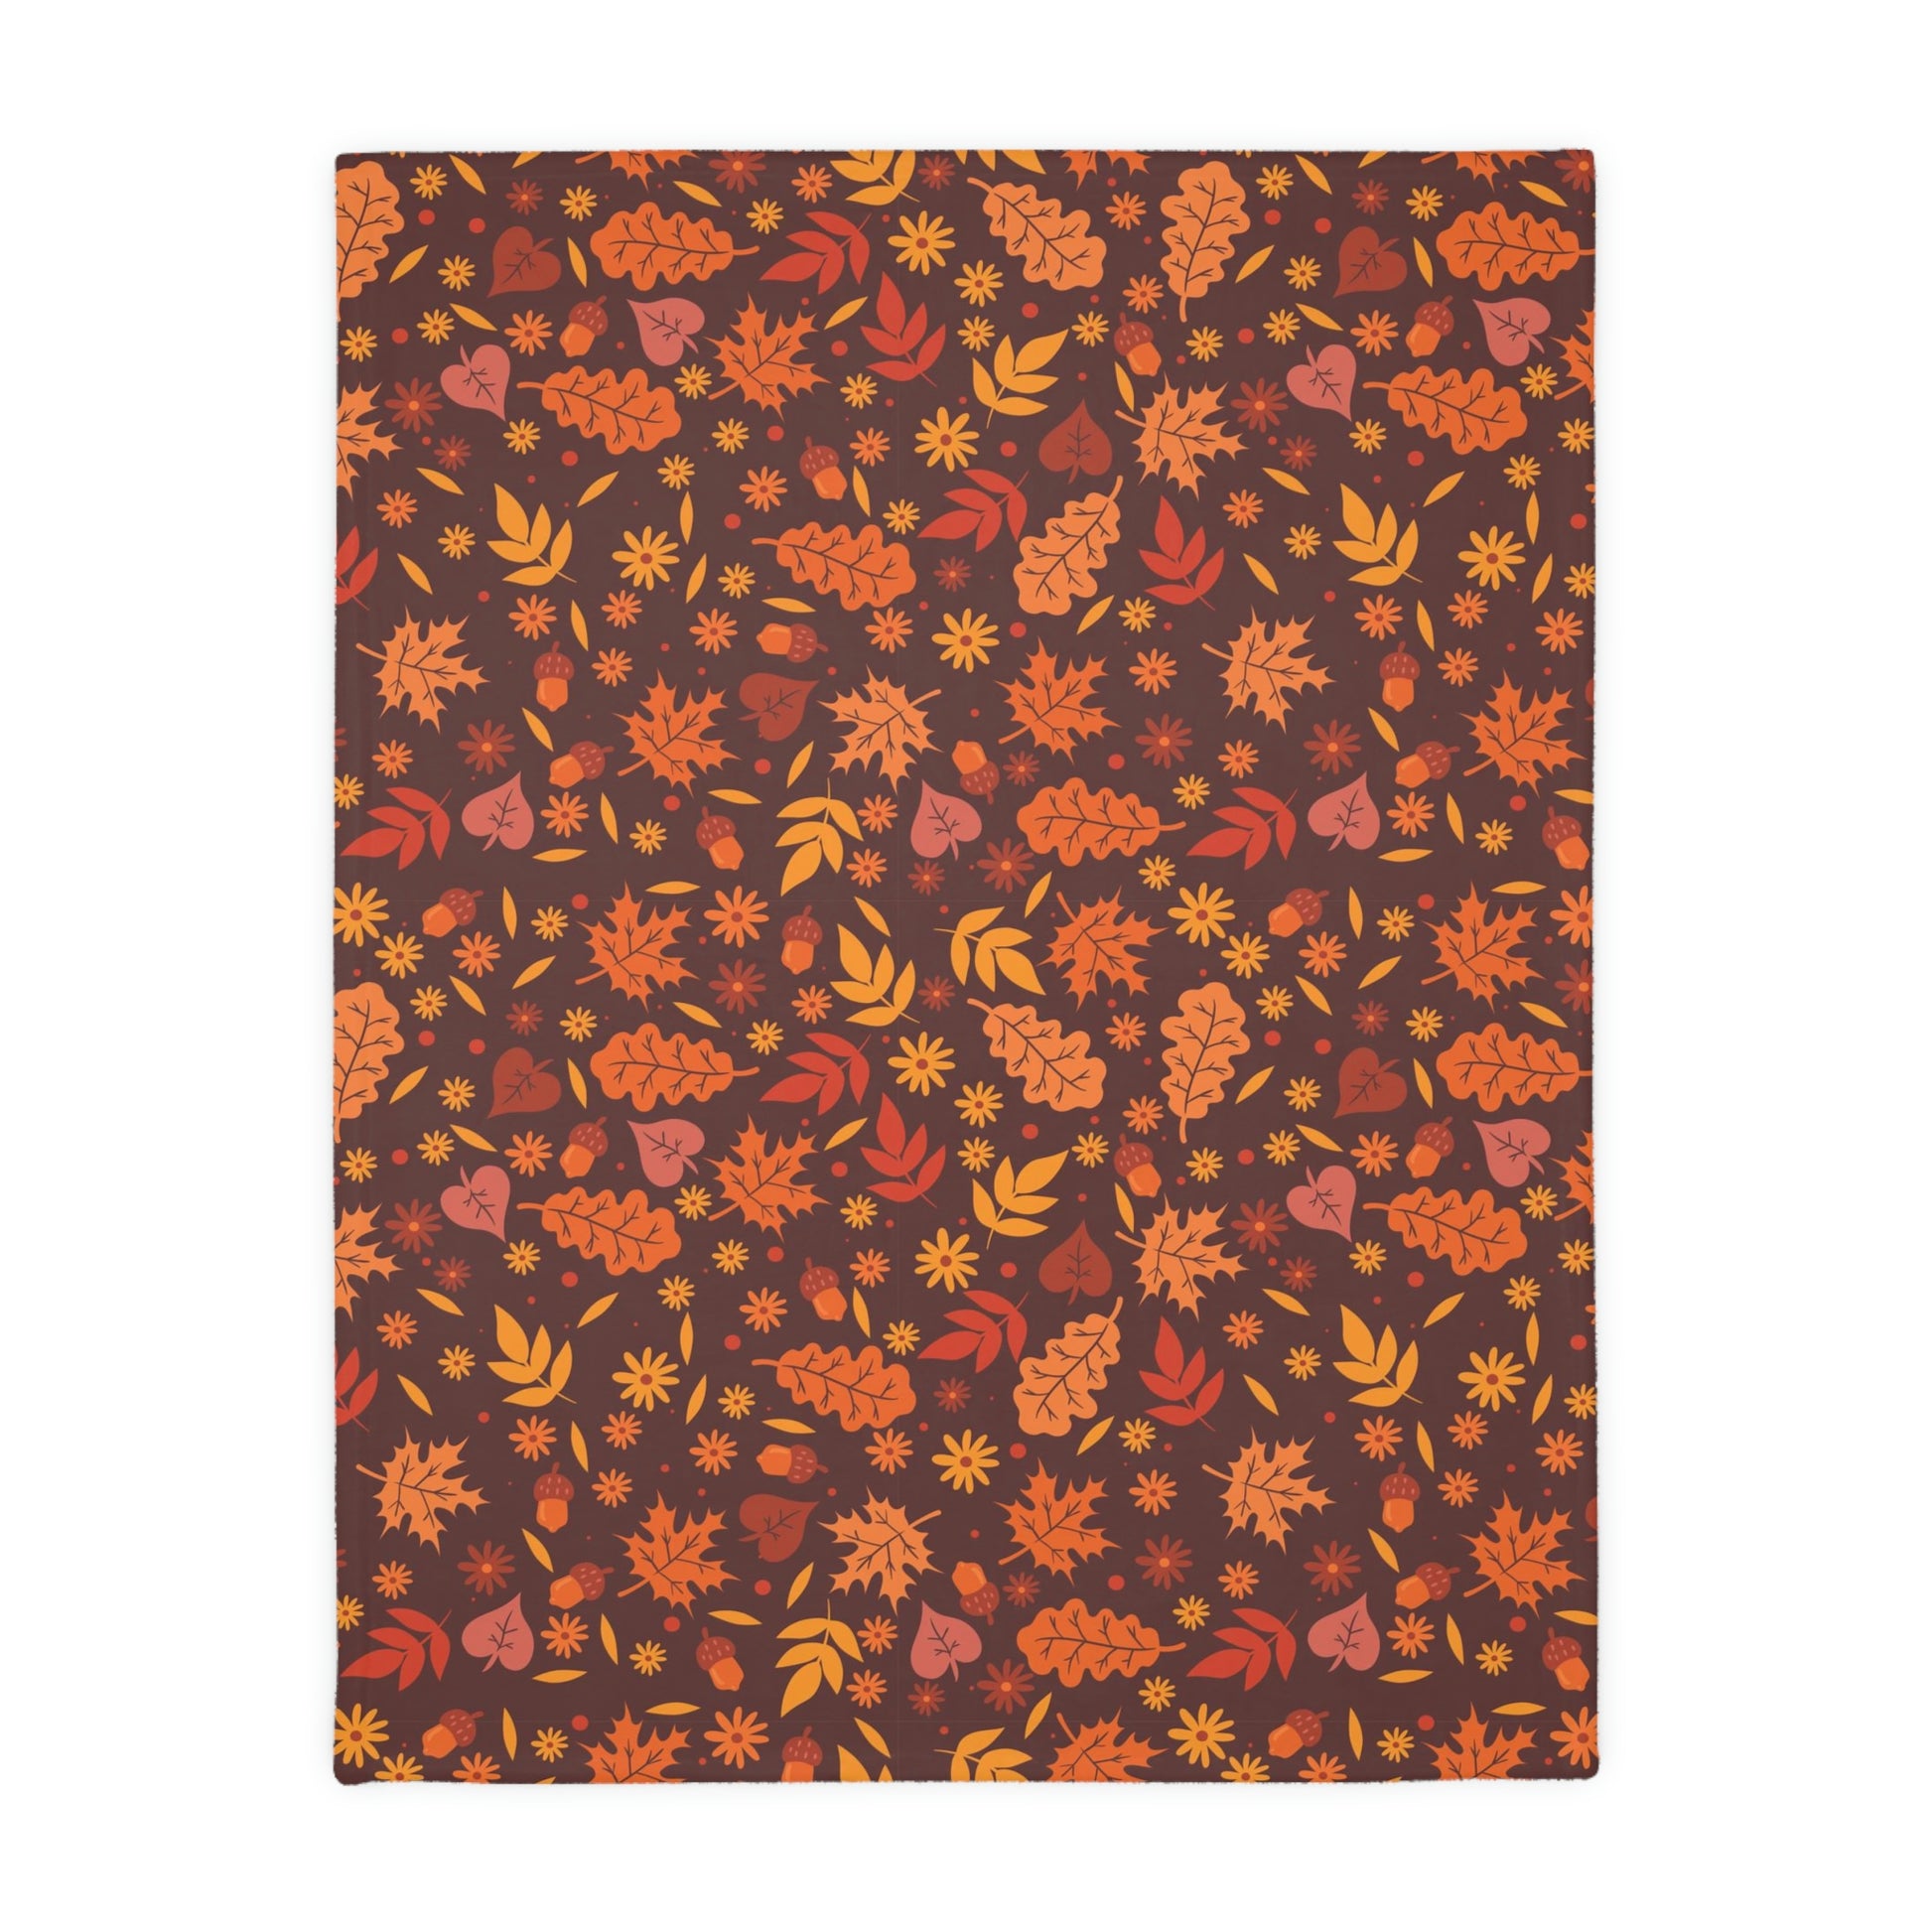 Fall Leaves Double Sided Blanket, Throw Autumn Fleece Thanksgiving Minky Velveteen Two Reversible Brown Purple Bed Soft Small Large Sofa Starcove Fashion